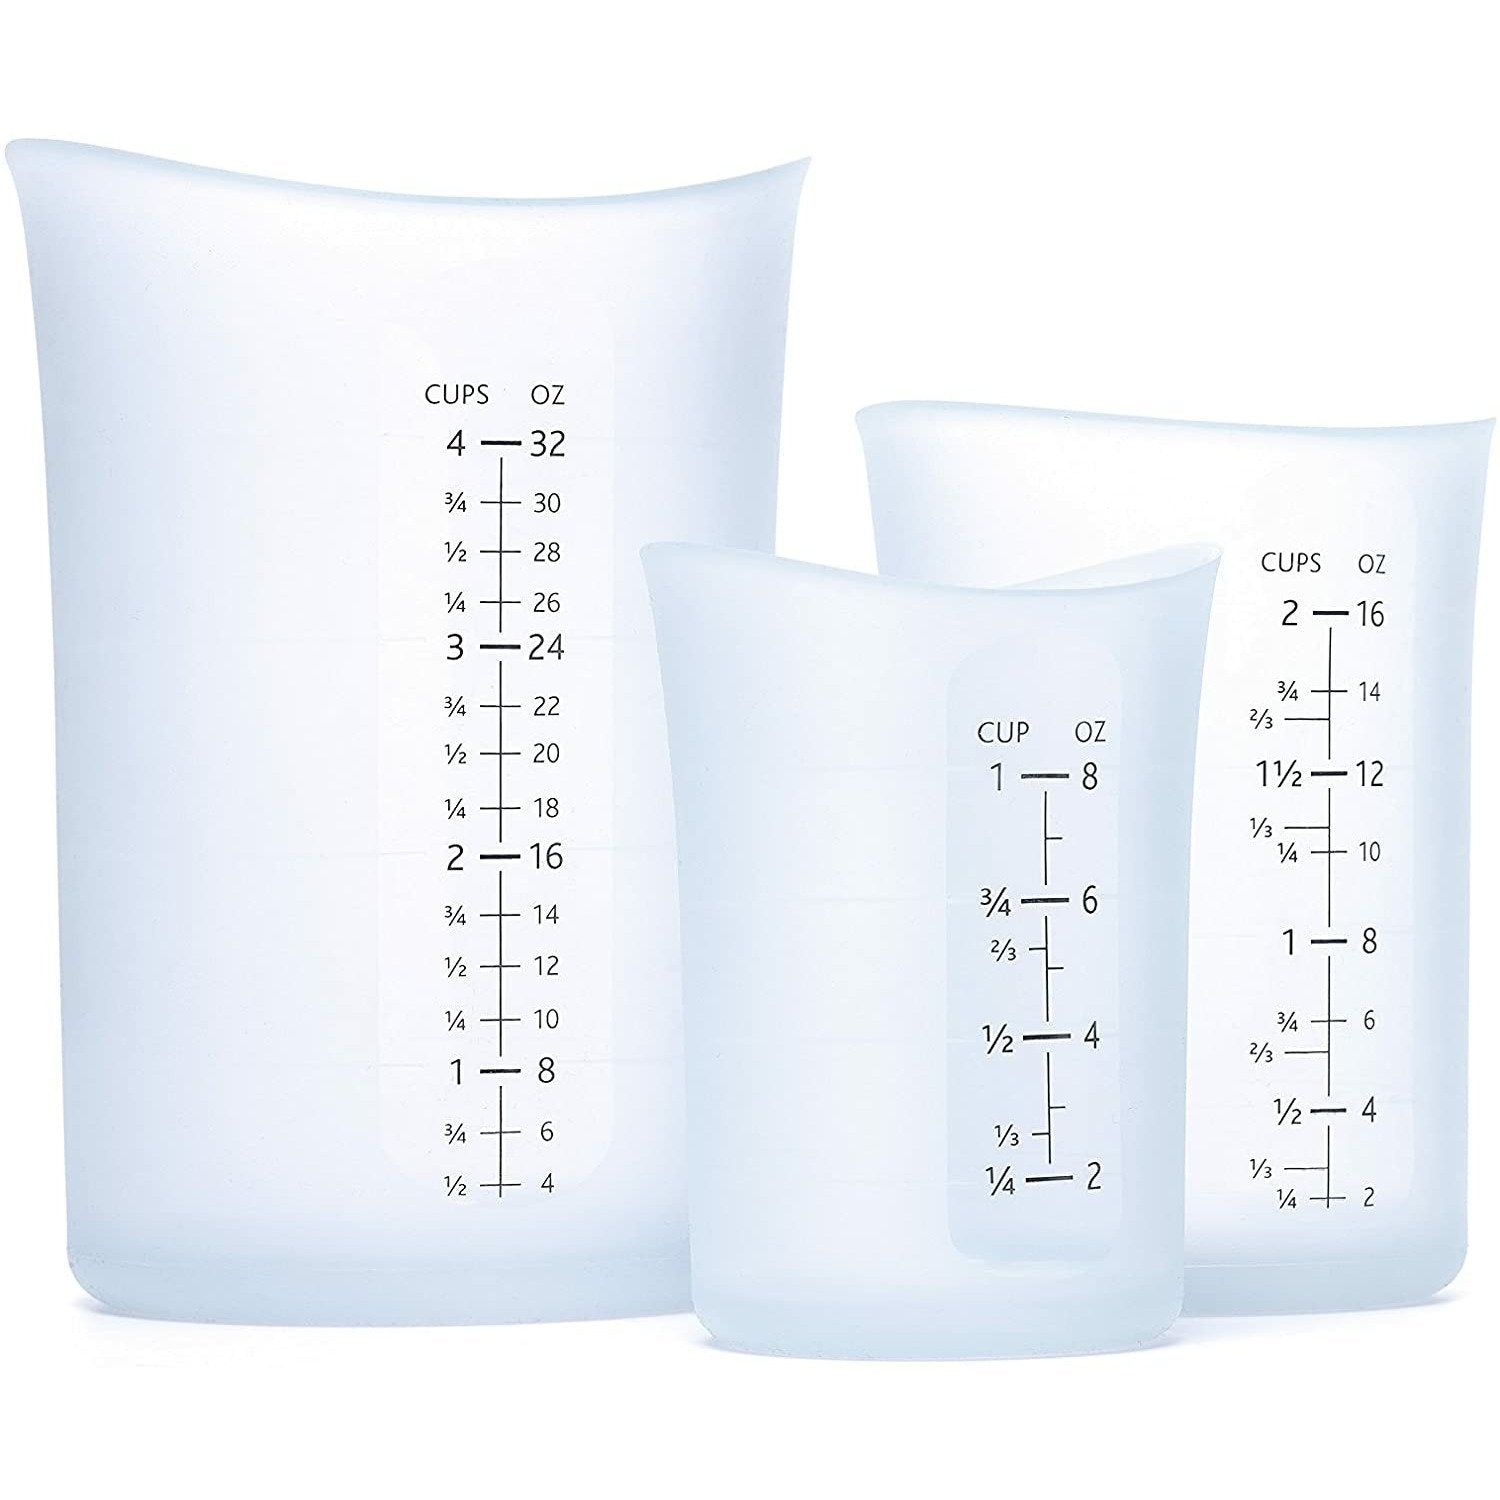 Measuring Cups Set of 3